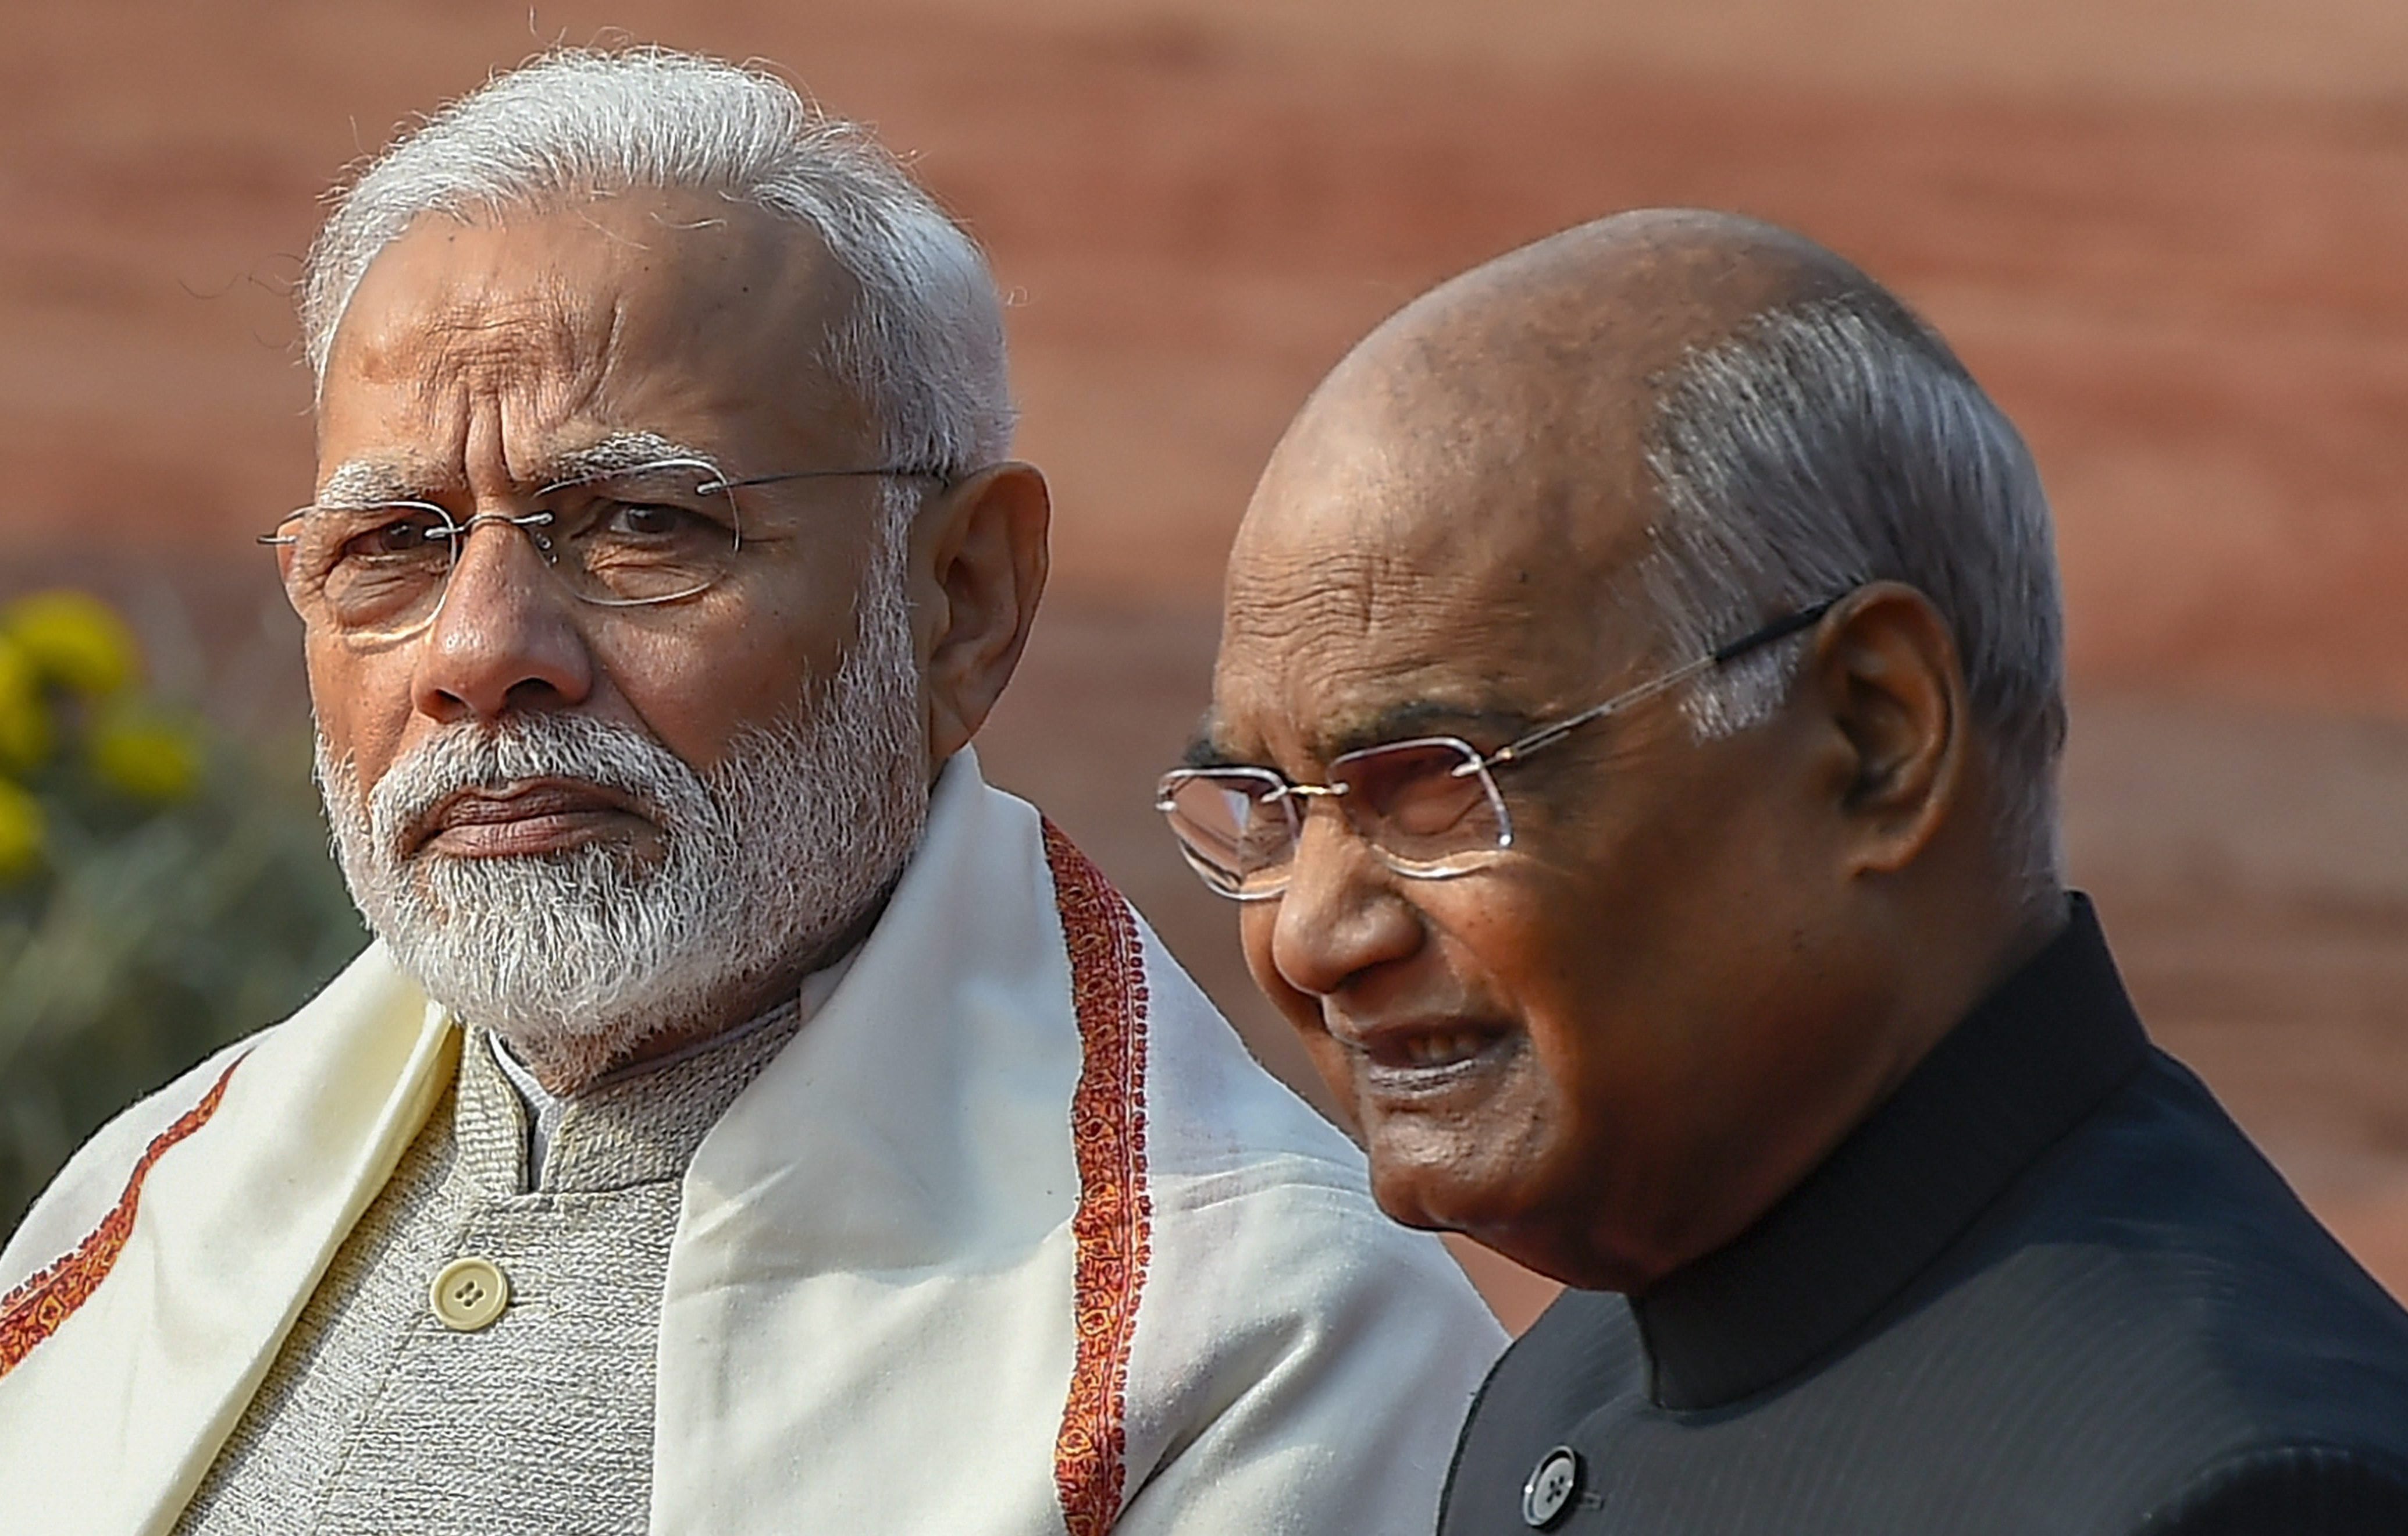 Who next after Kovind? That’s a tough challenge for Modi